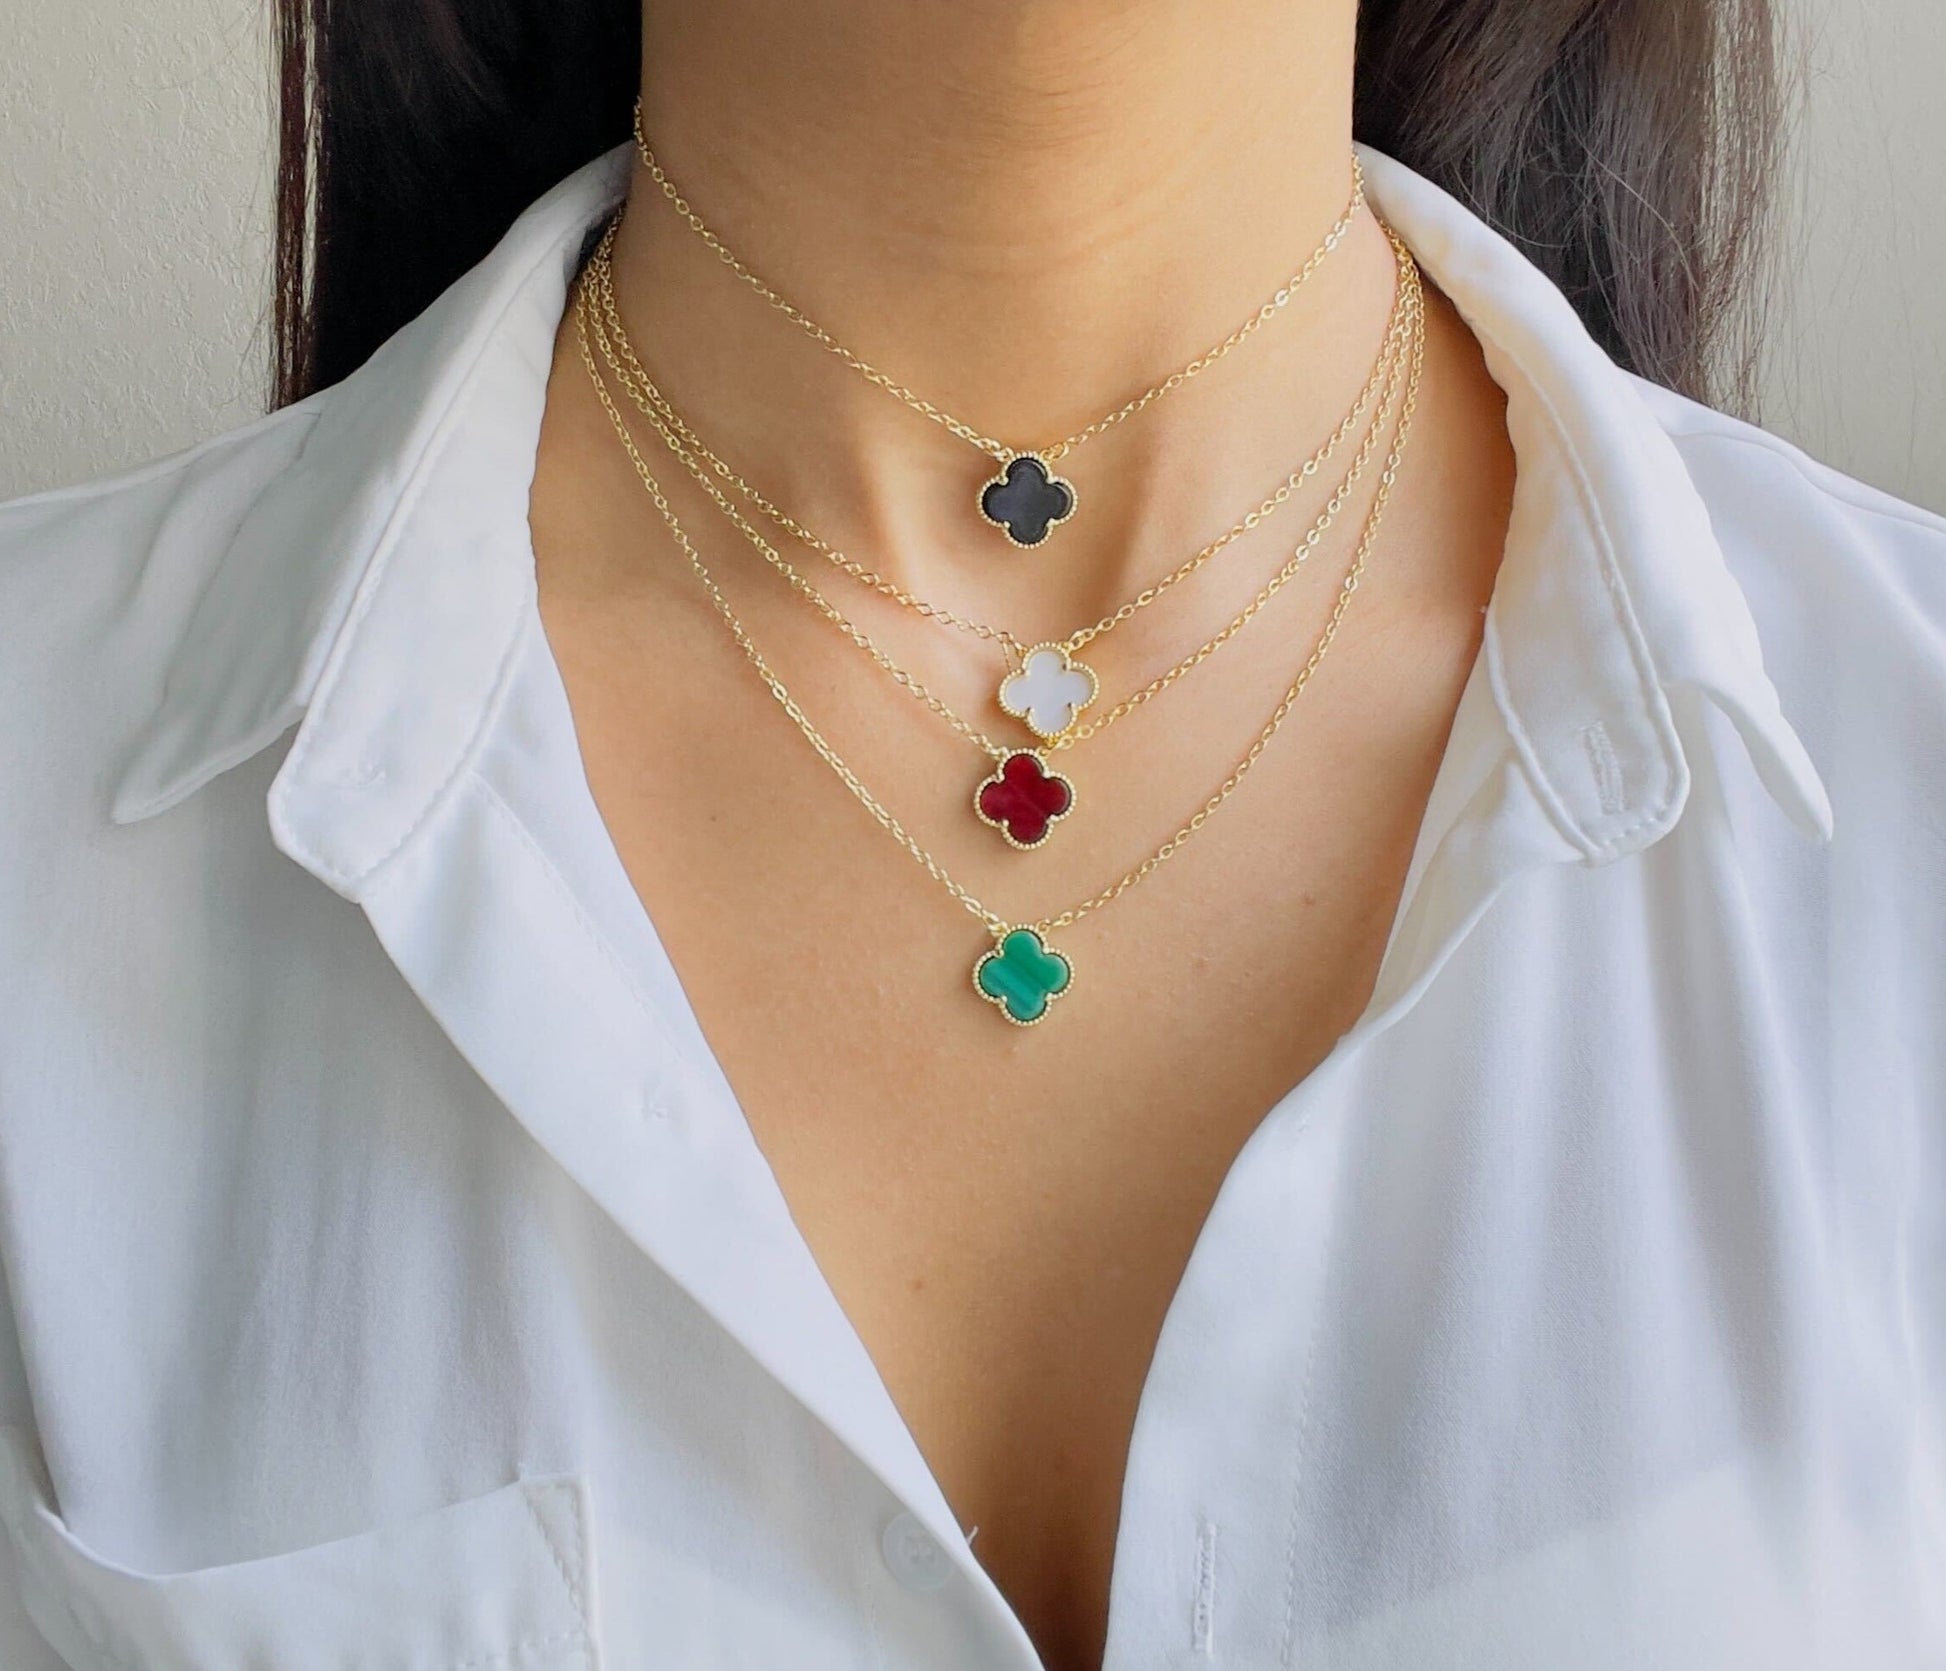 All four leaf clover necklaces in red, black, white and green on a women